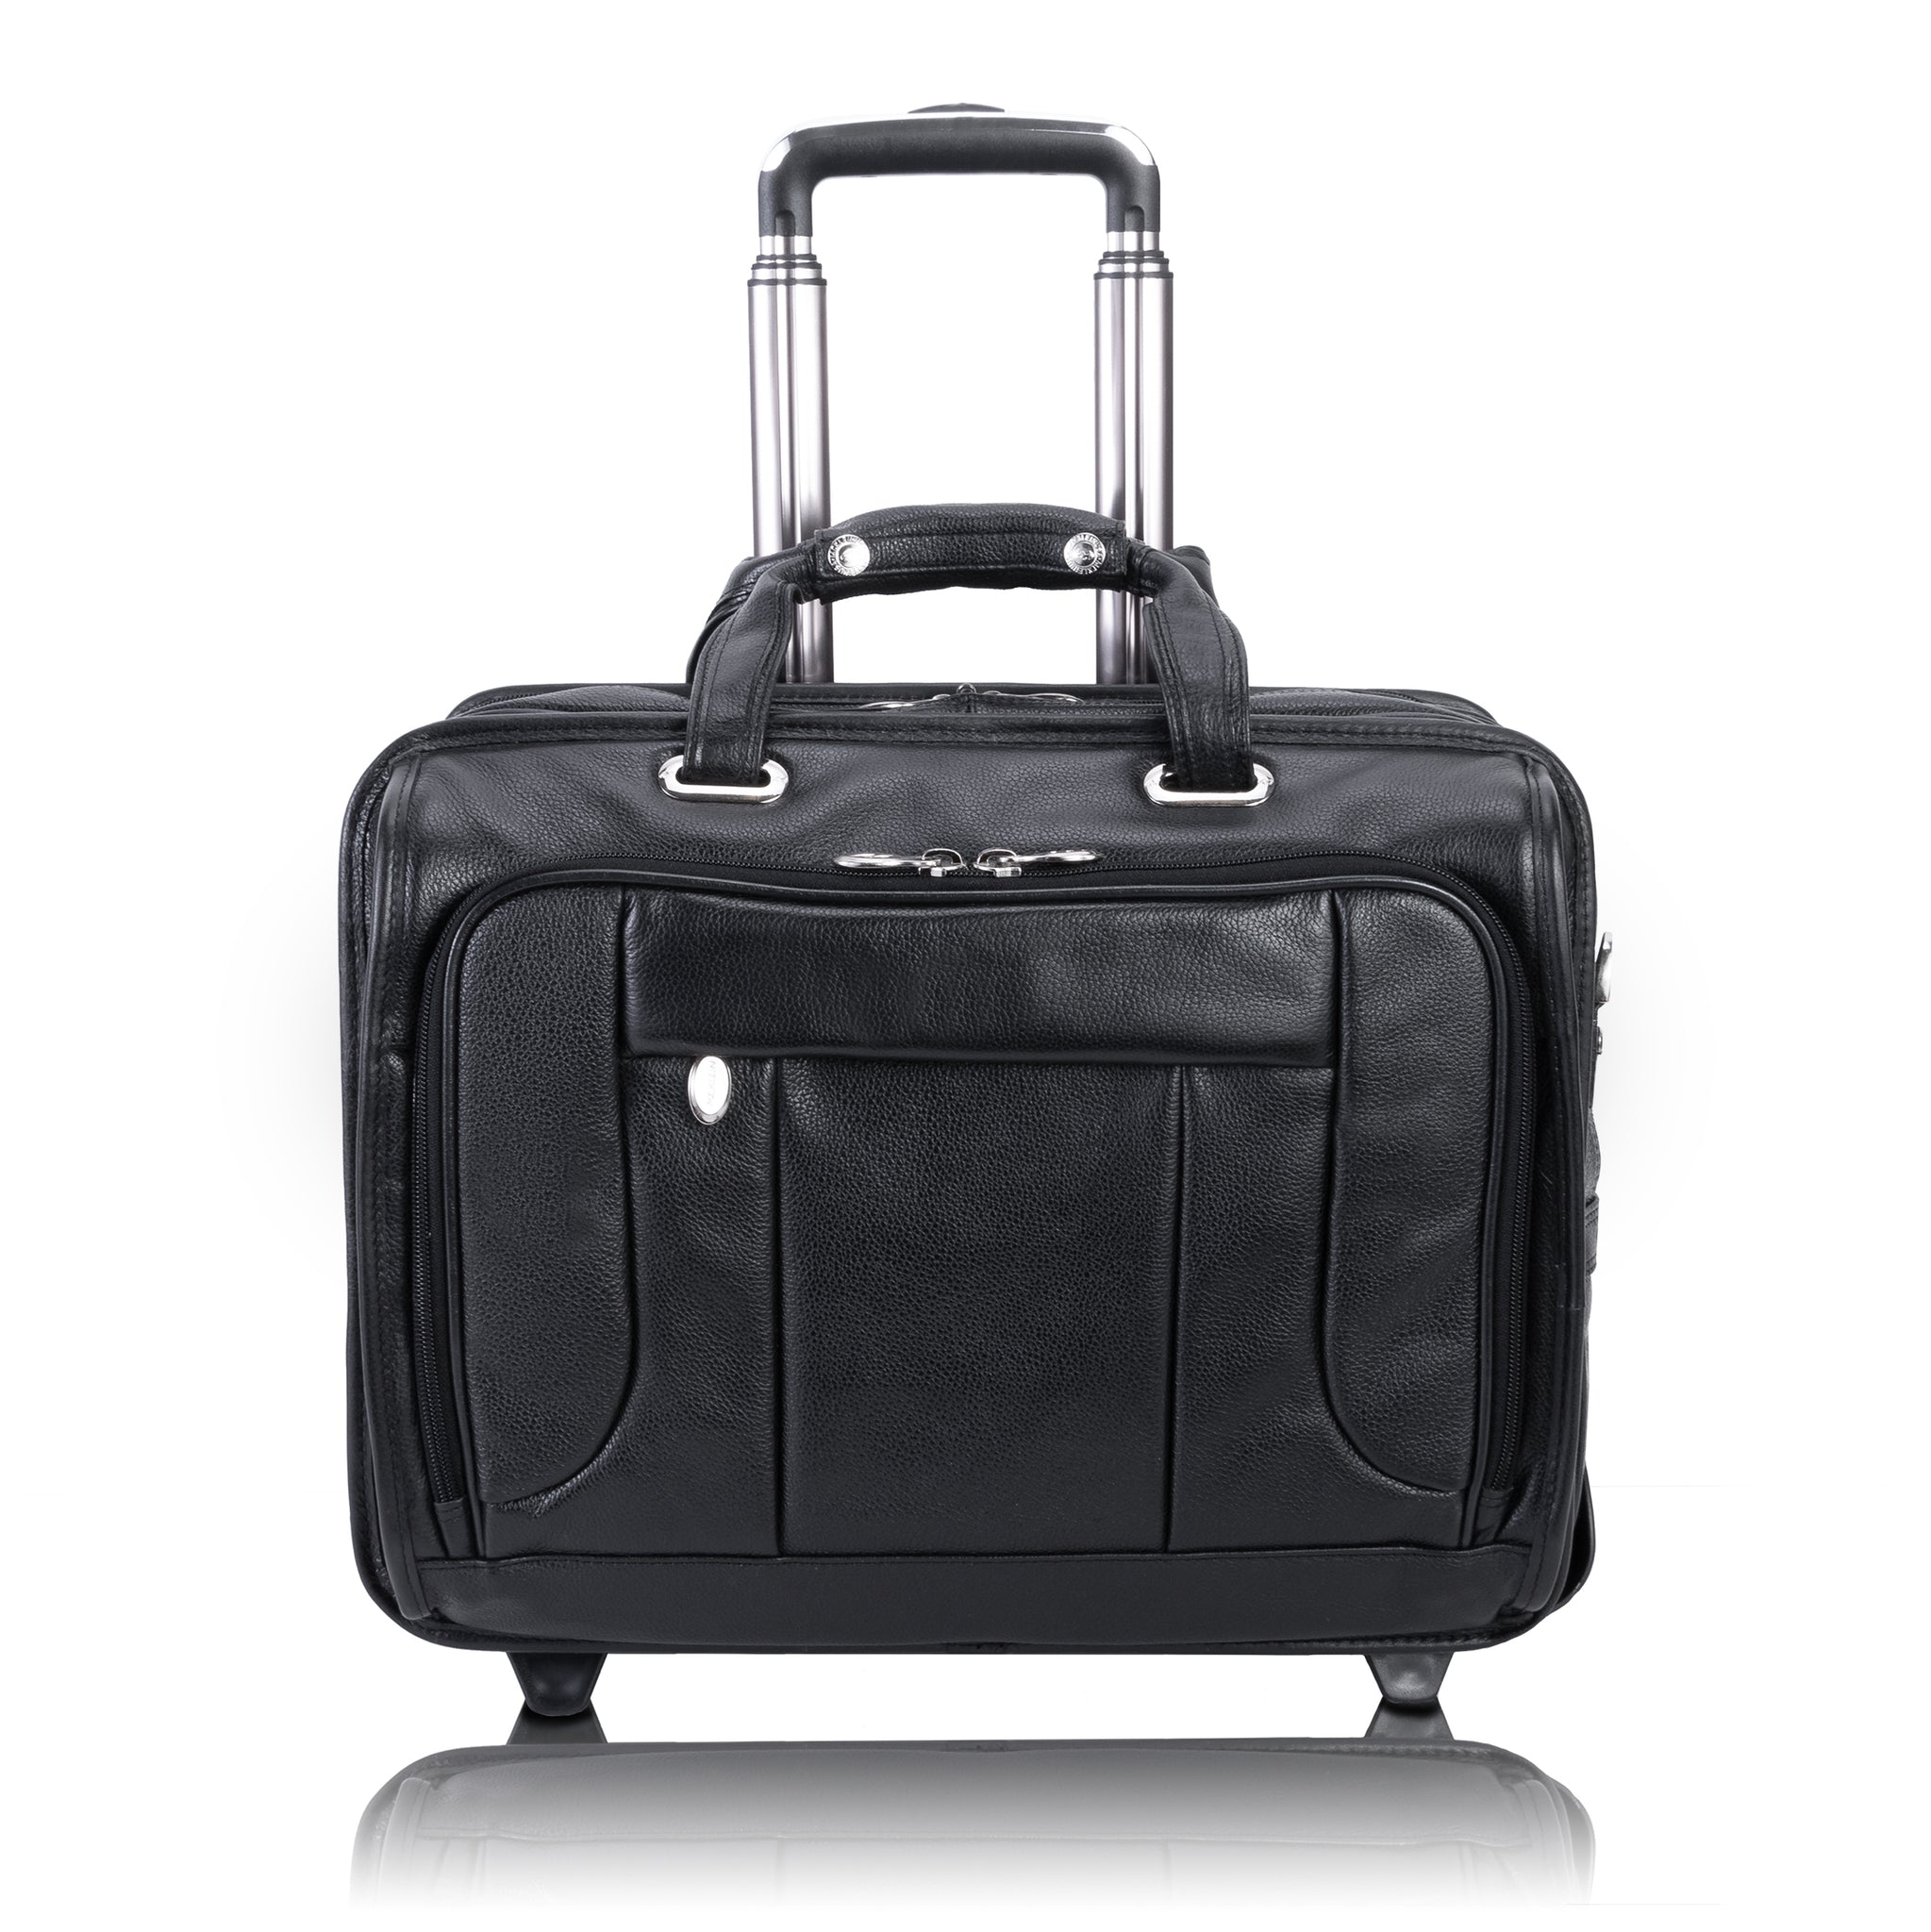 McKlein WEST TOWN 17" Leather Fly-Through Checkpoint-Friendly Patented Detachable -Wheeled Laptop Briefcase